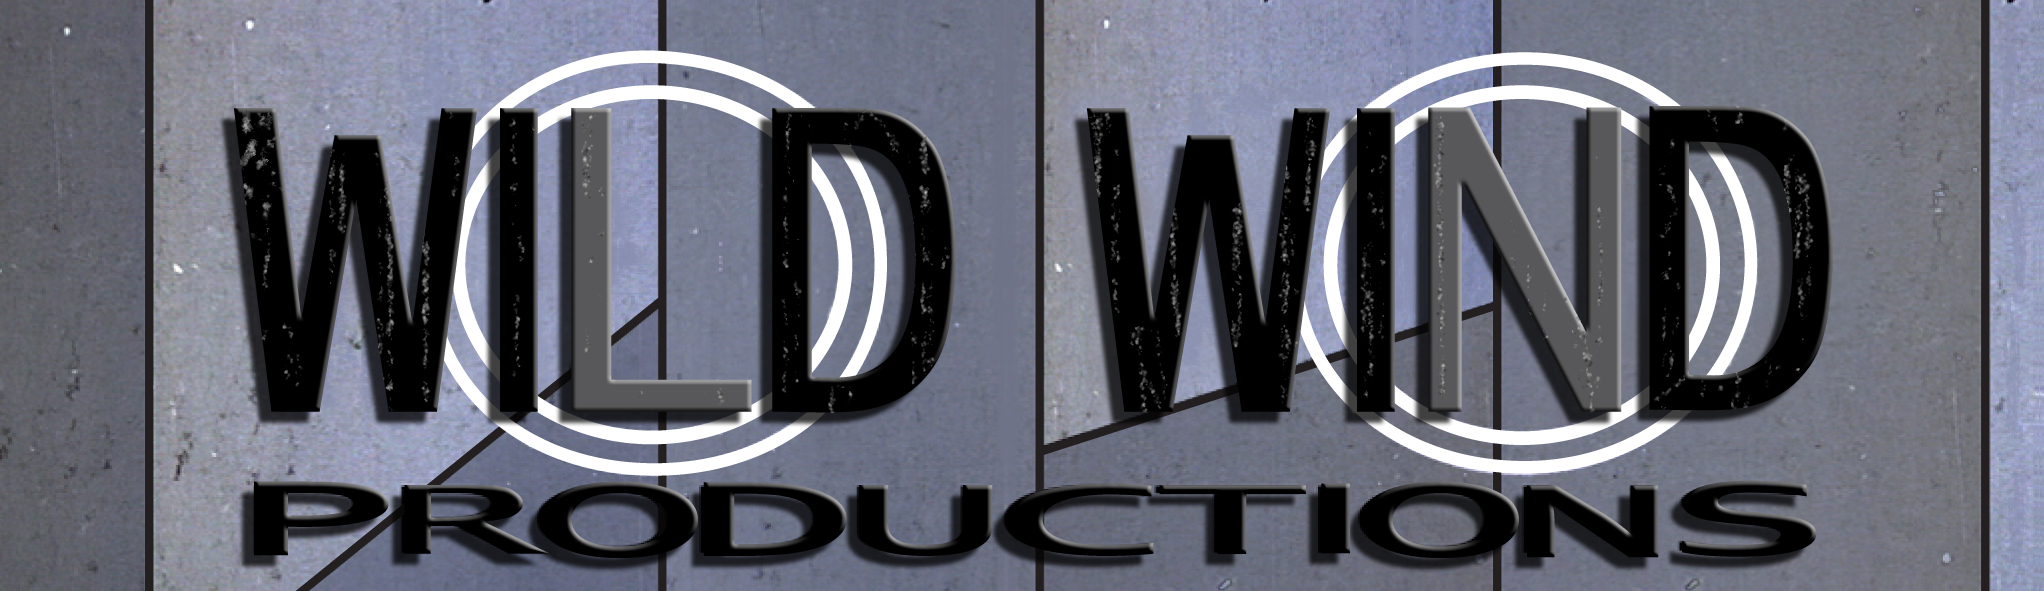 Wild Wind Productions